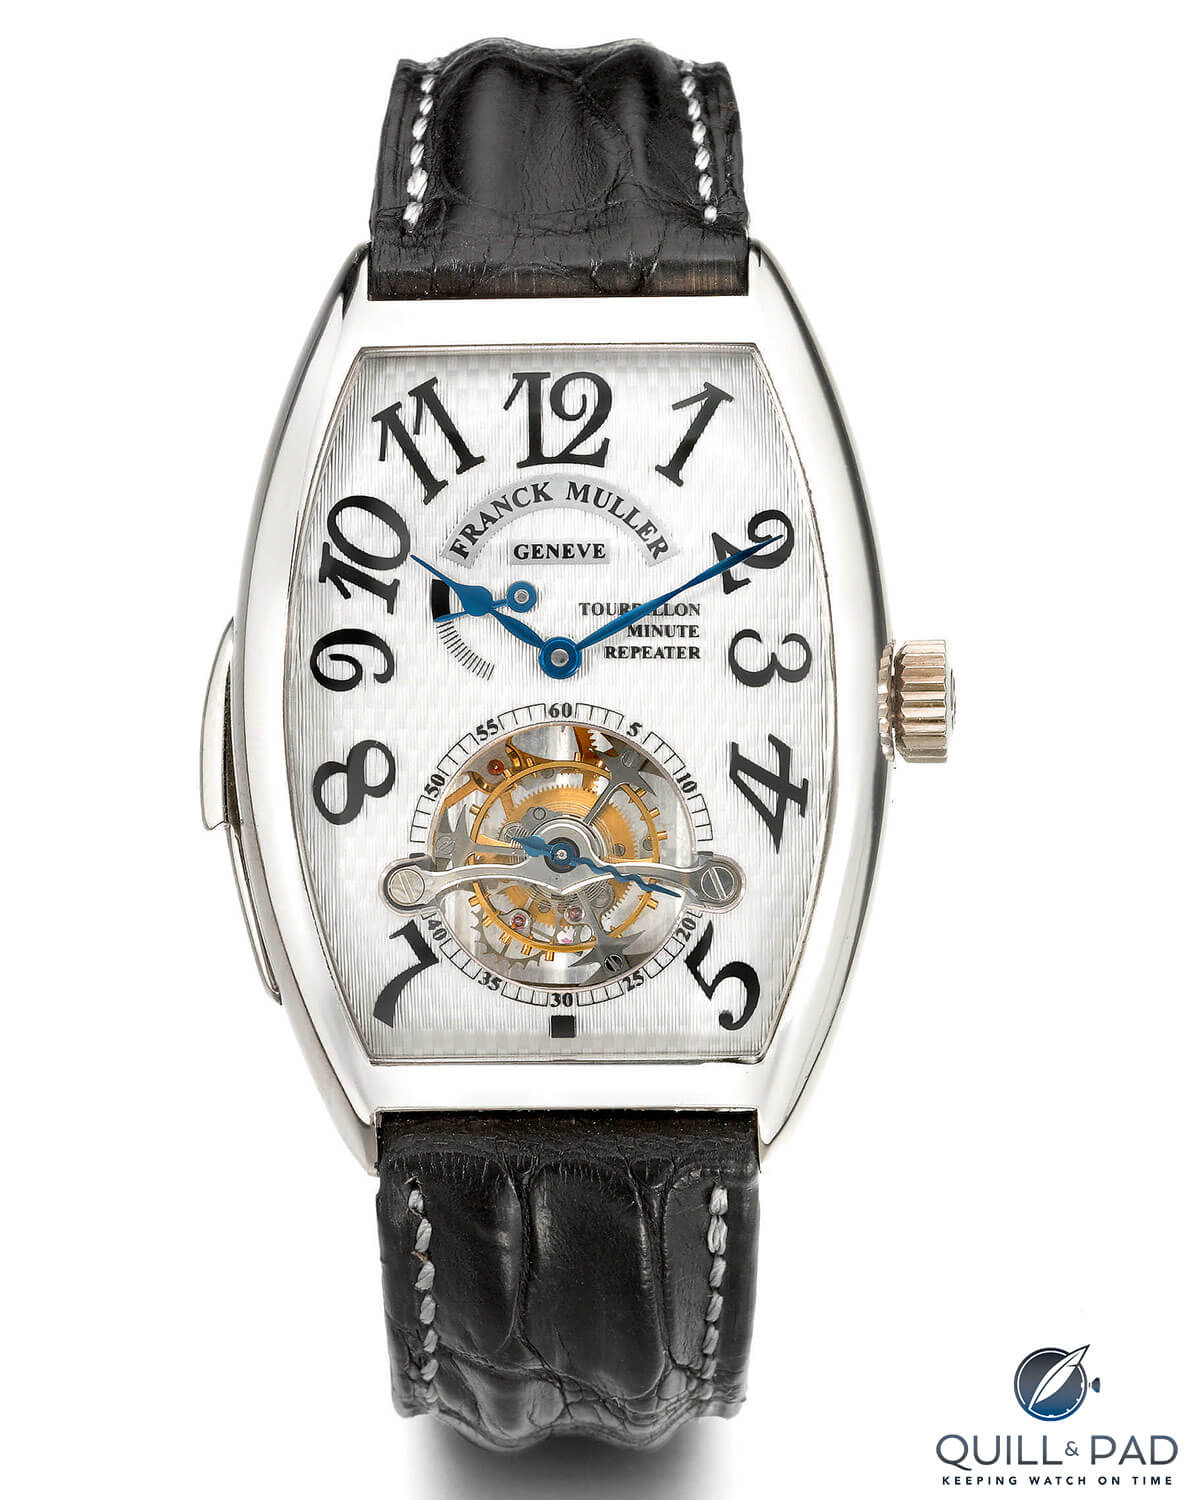 Franck Muller Imperial Tourbillon Minute Repeater owned by Robin Williams in Sothebys' auction October 2018